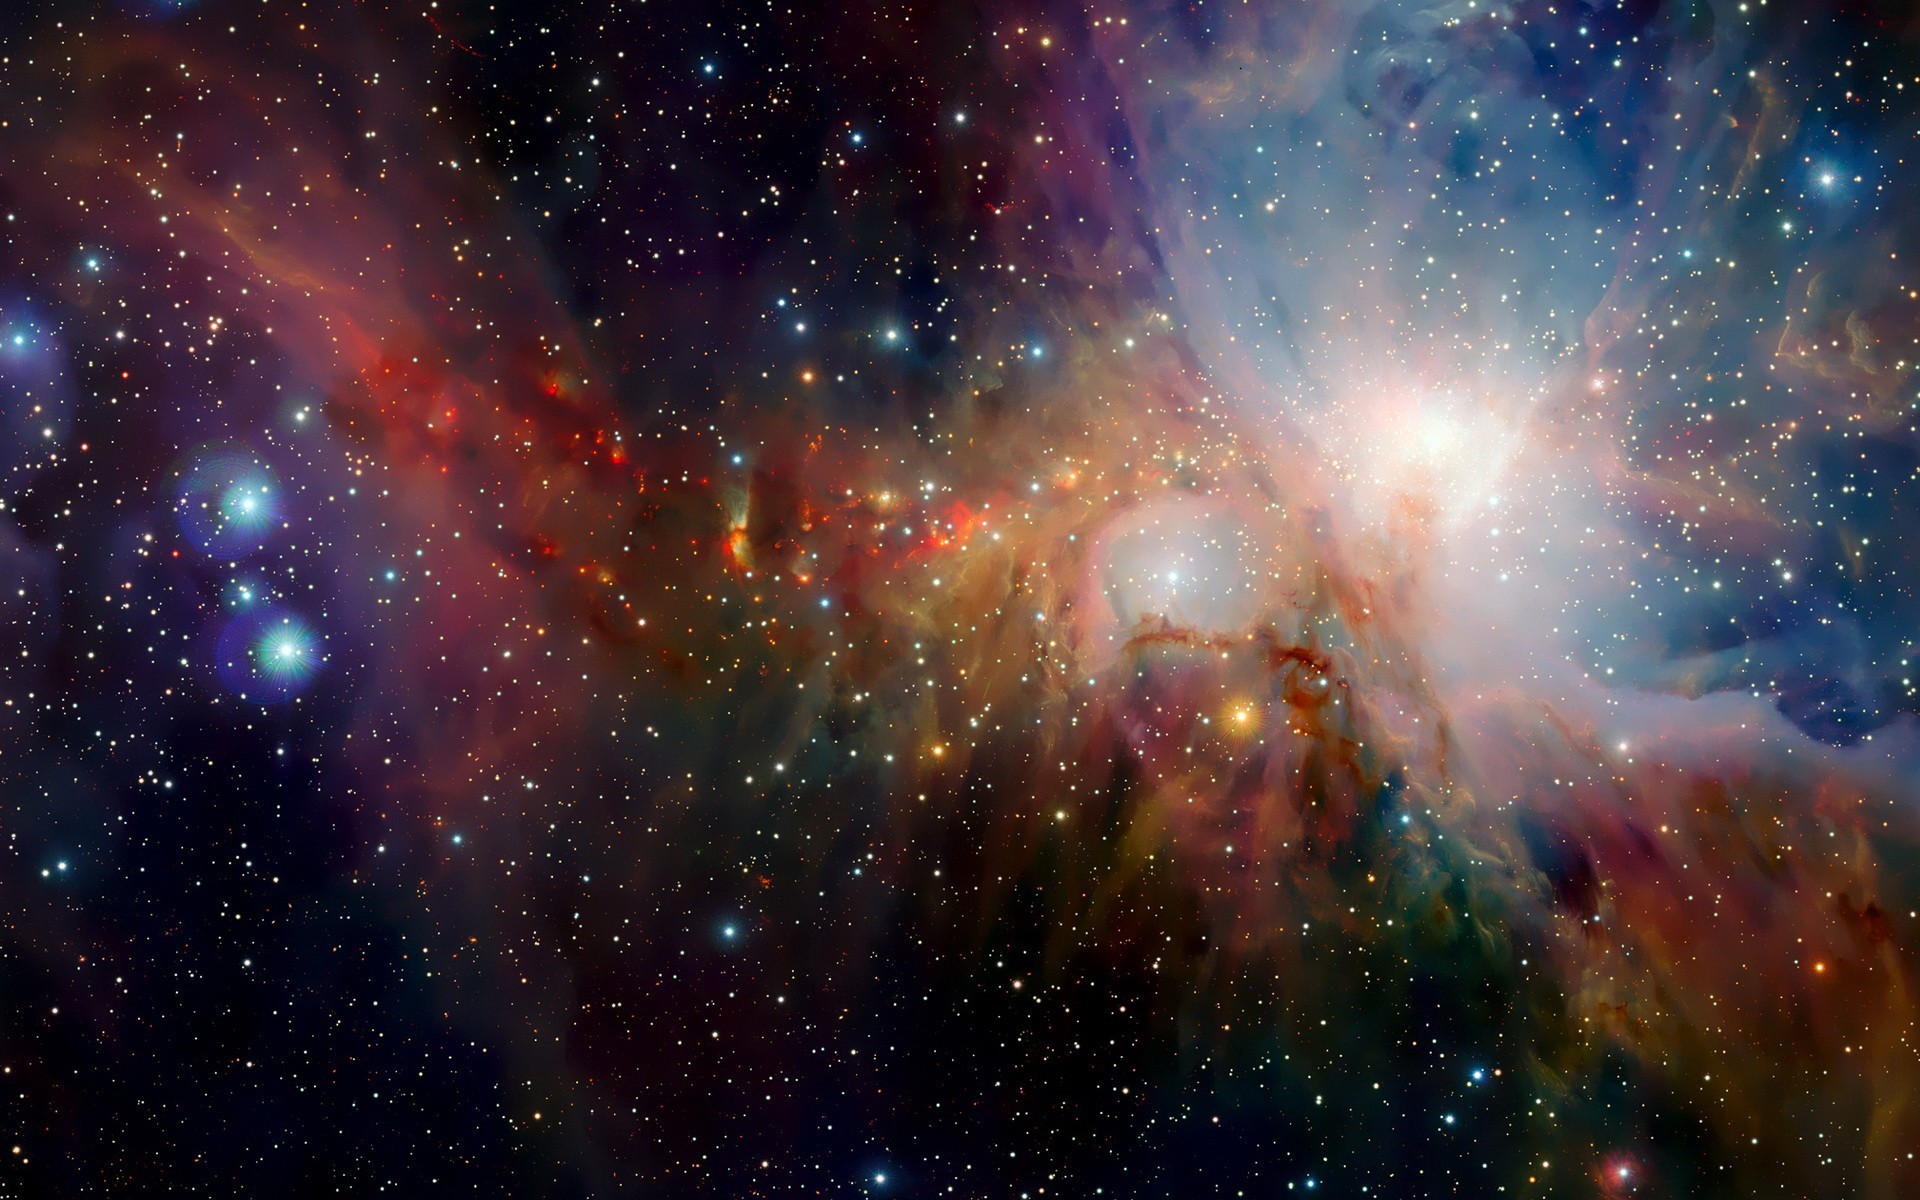 Deep Space Images Wallpaper (71+ images)